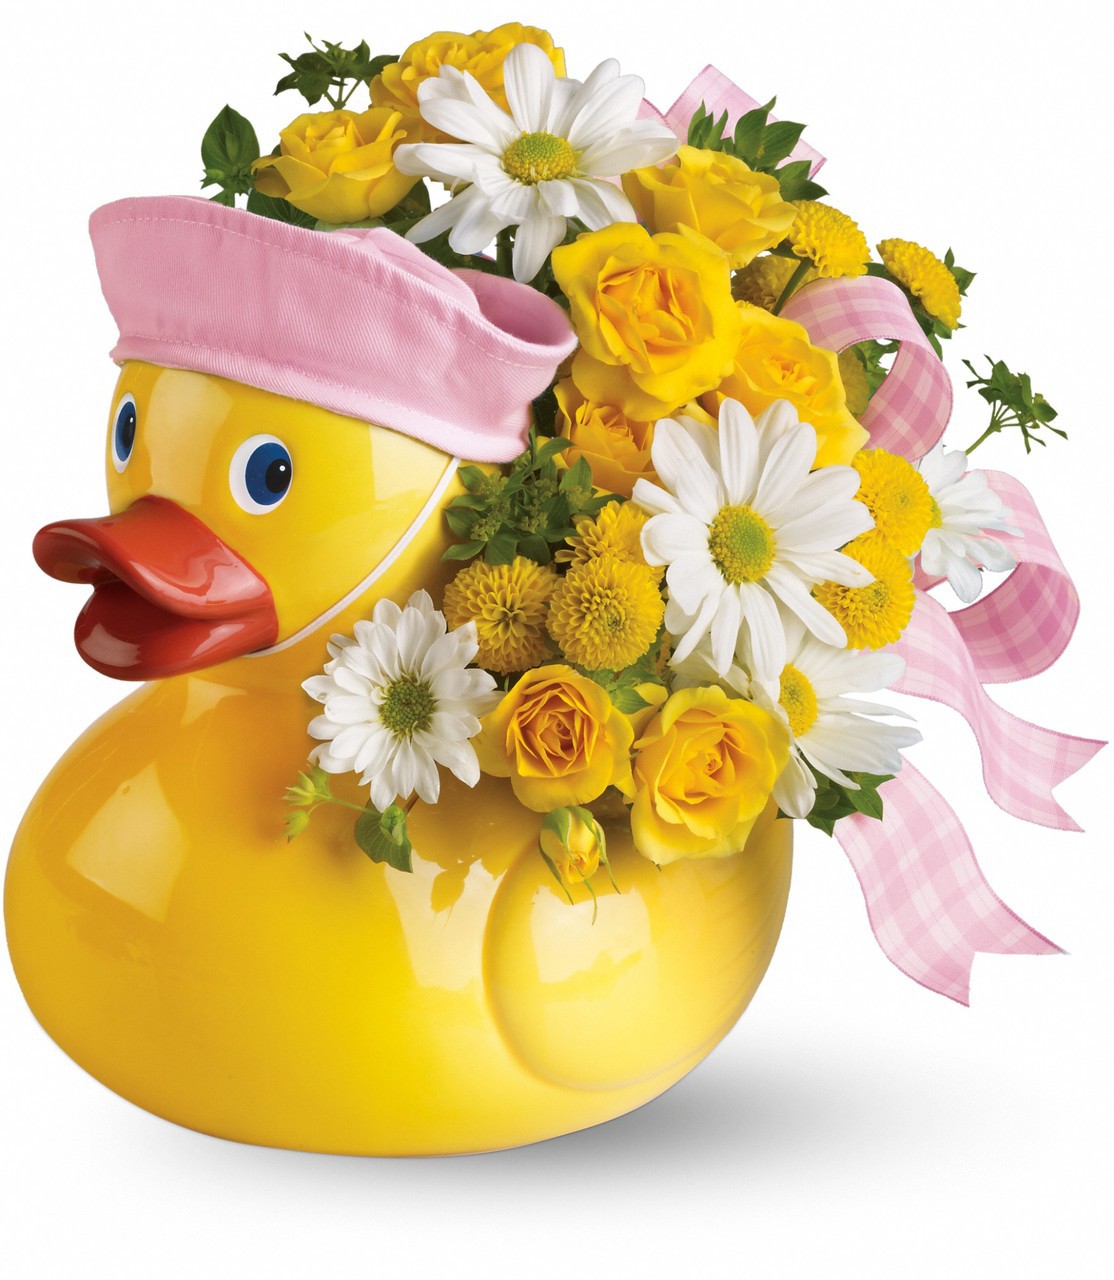 utmb league city campus hospital flower delivery yellow duck new baby girl